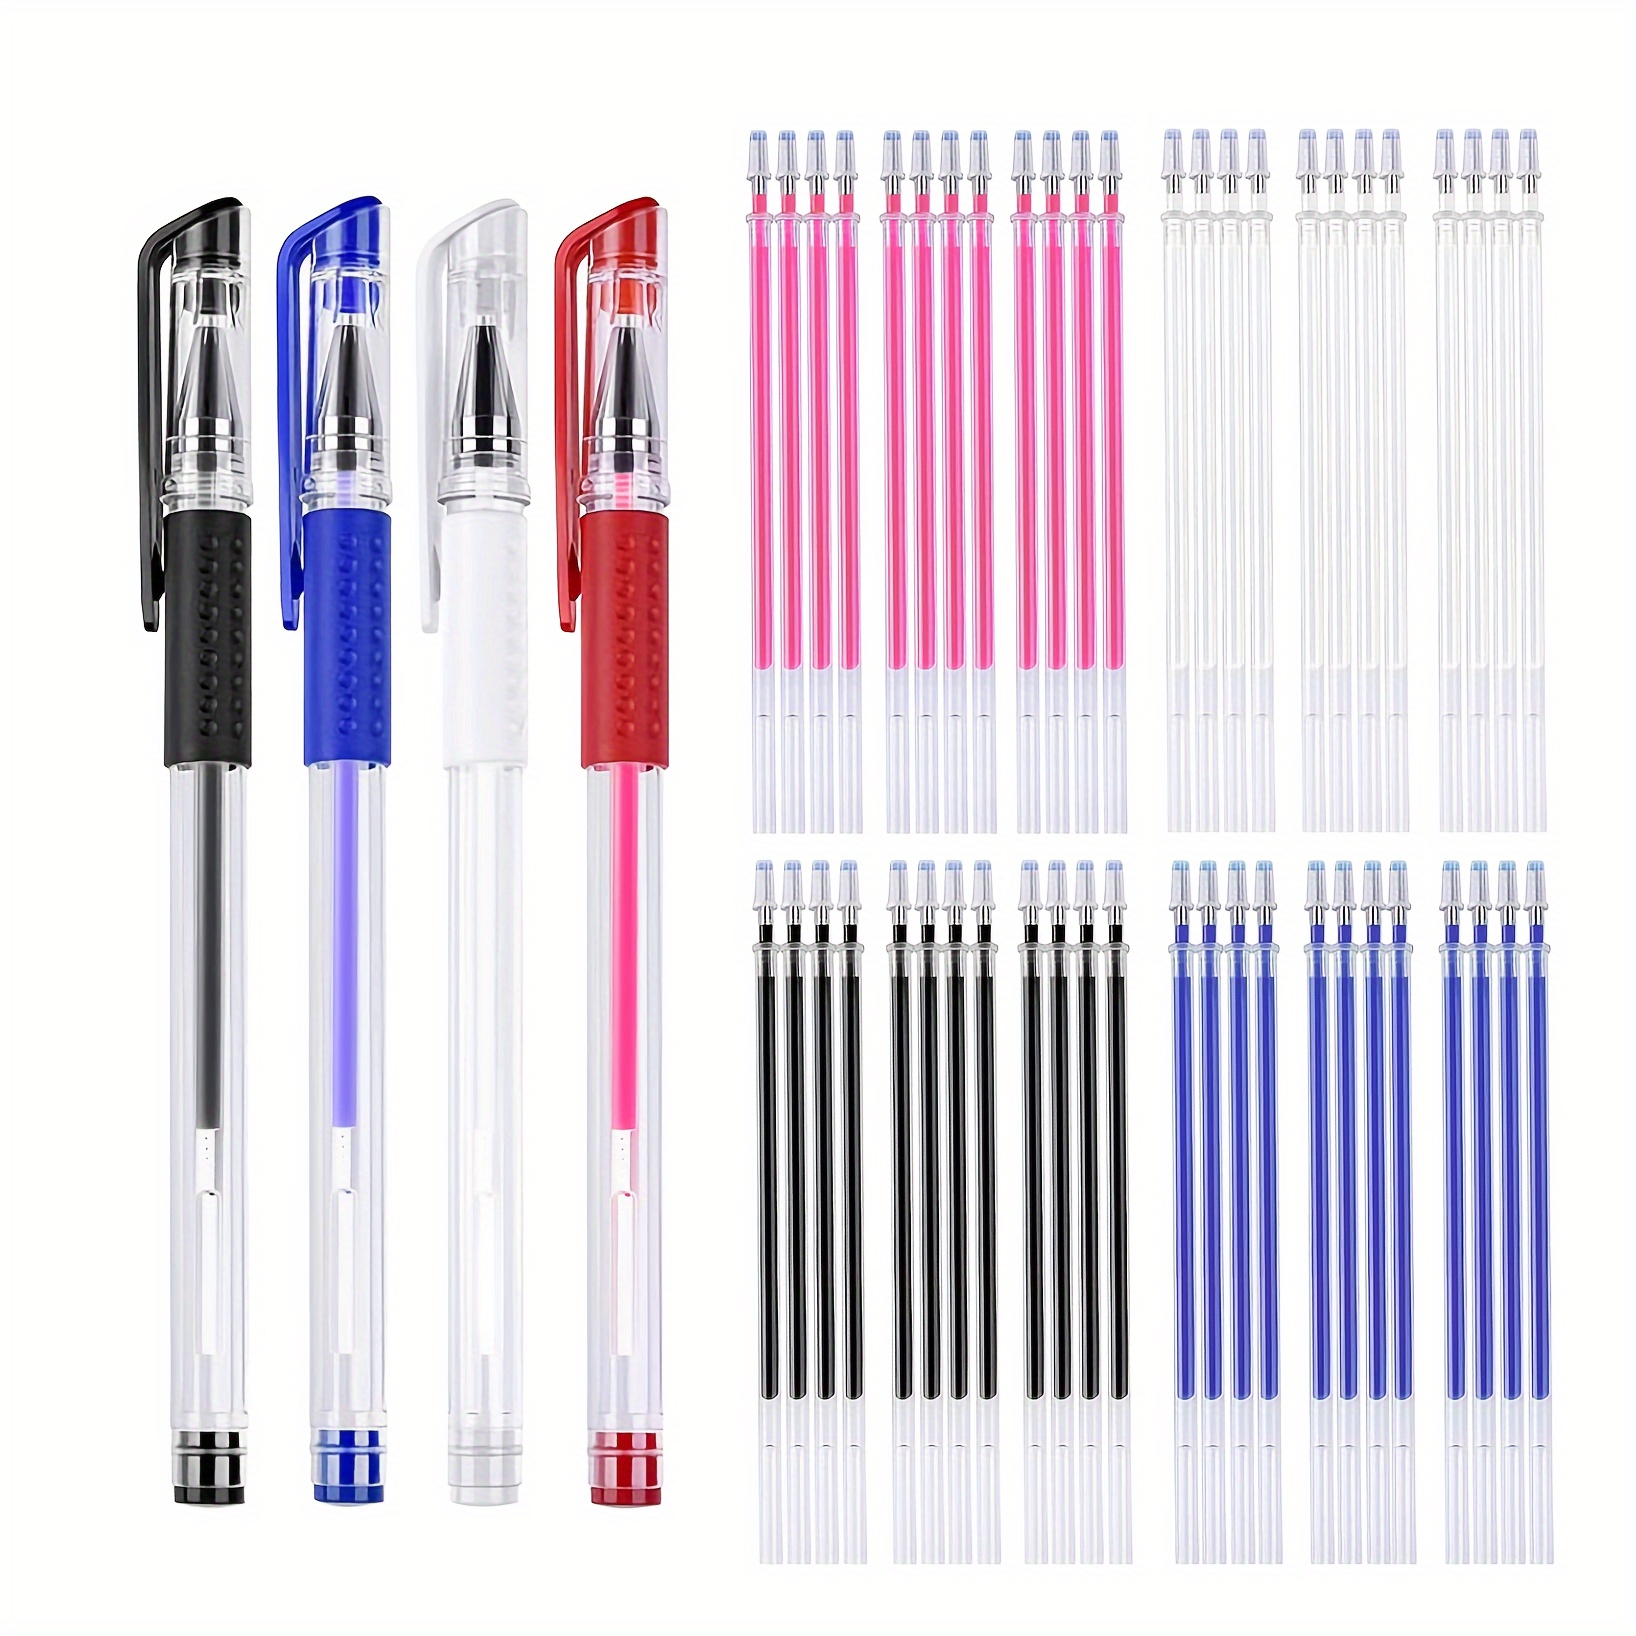 

8-piece Heat Erasable Fabric Marking Pens With 56 Refills, White, Red, Blue - Quilting Sewing Diy Dressmaking Tailors Chalk Markers